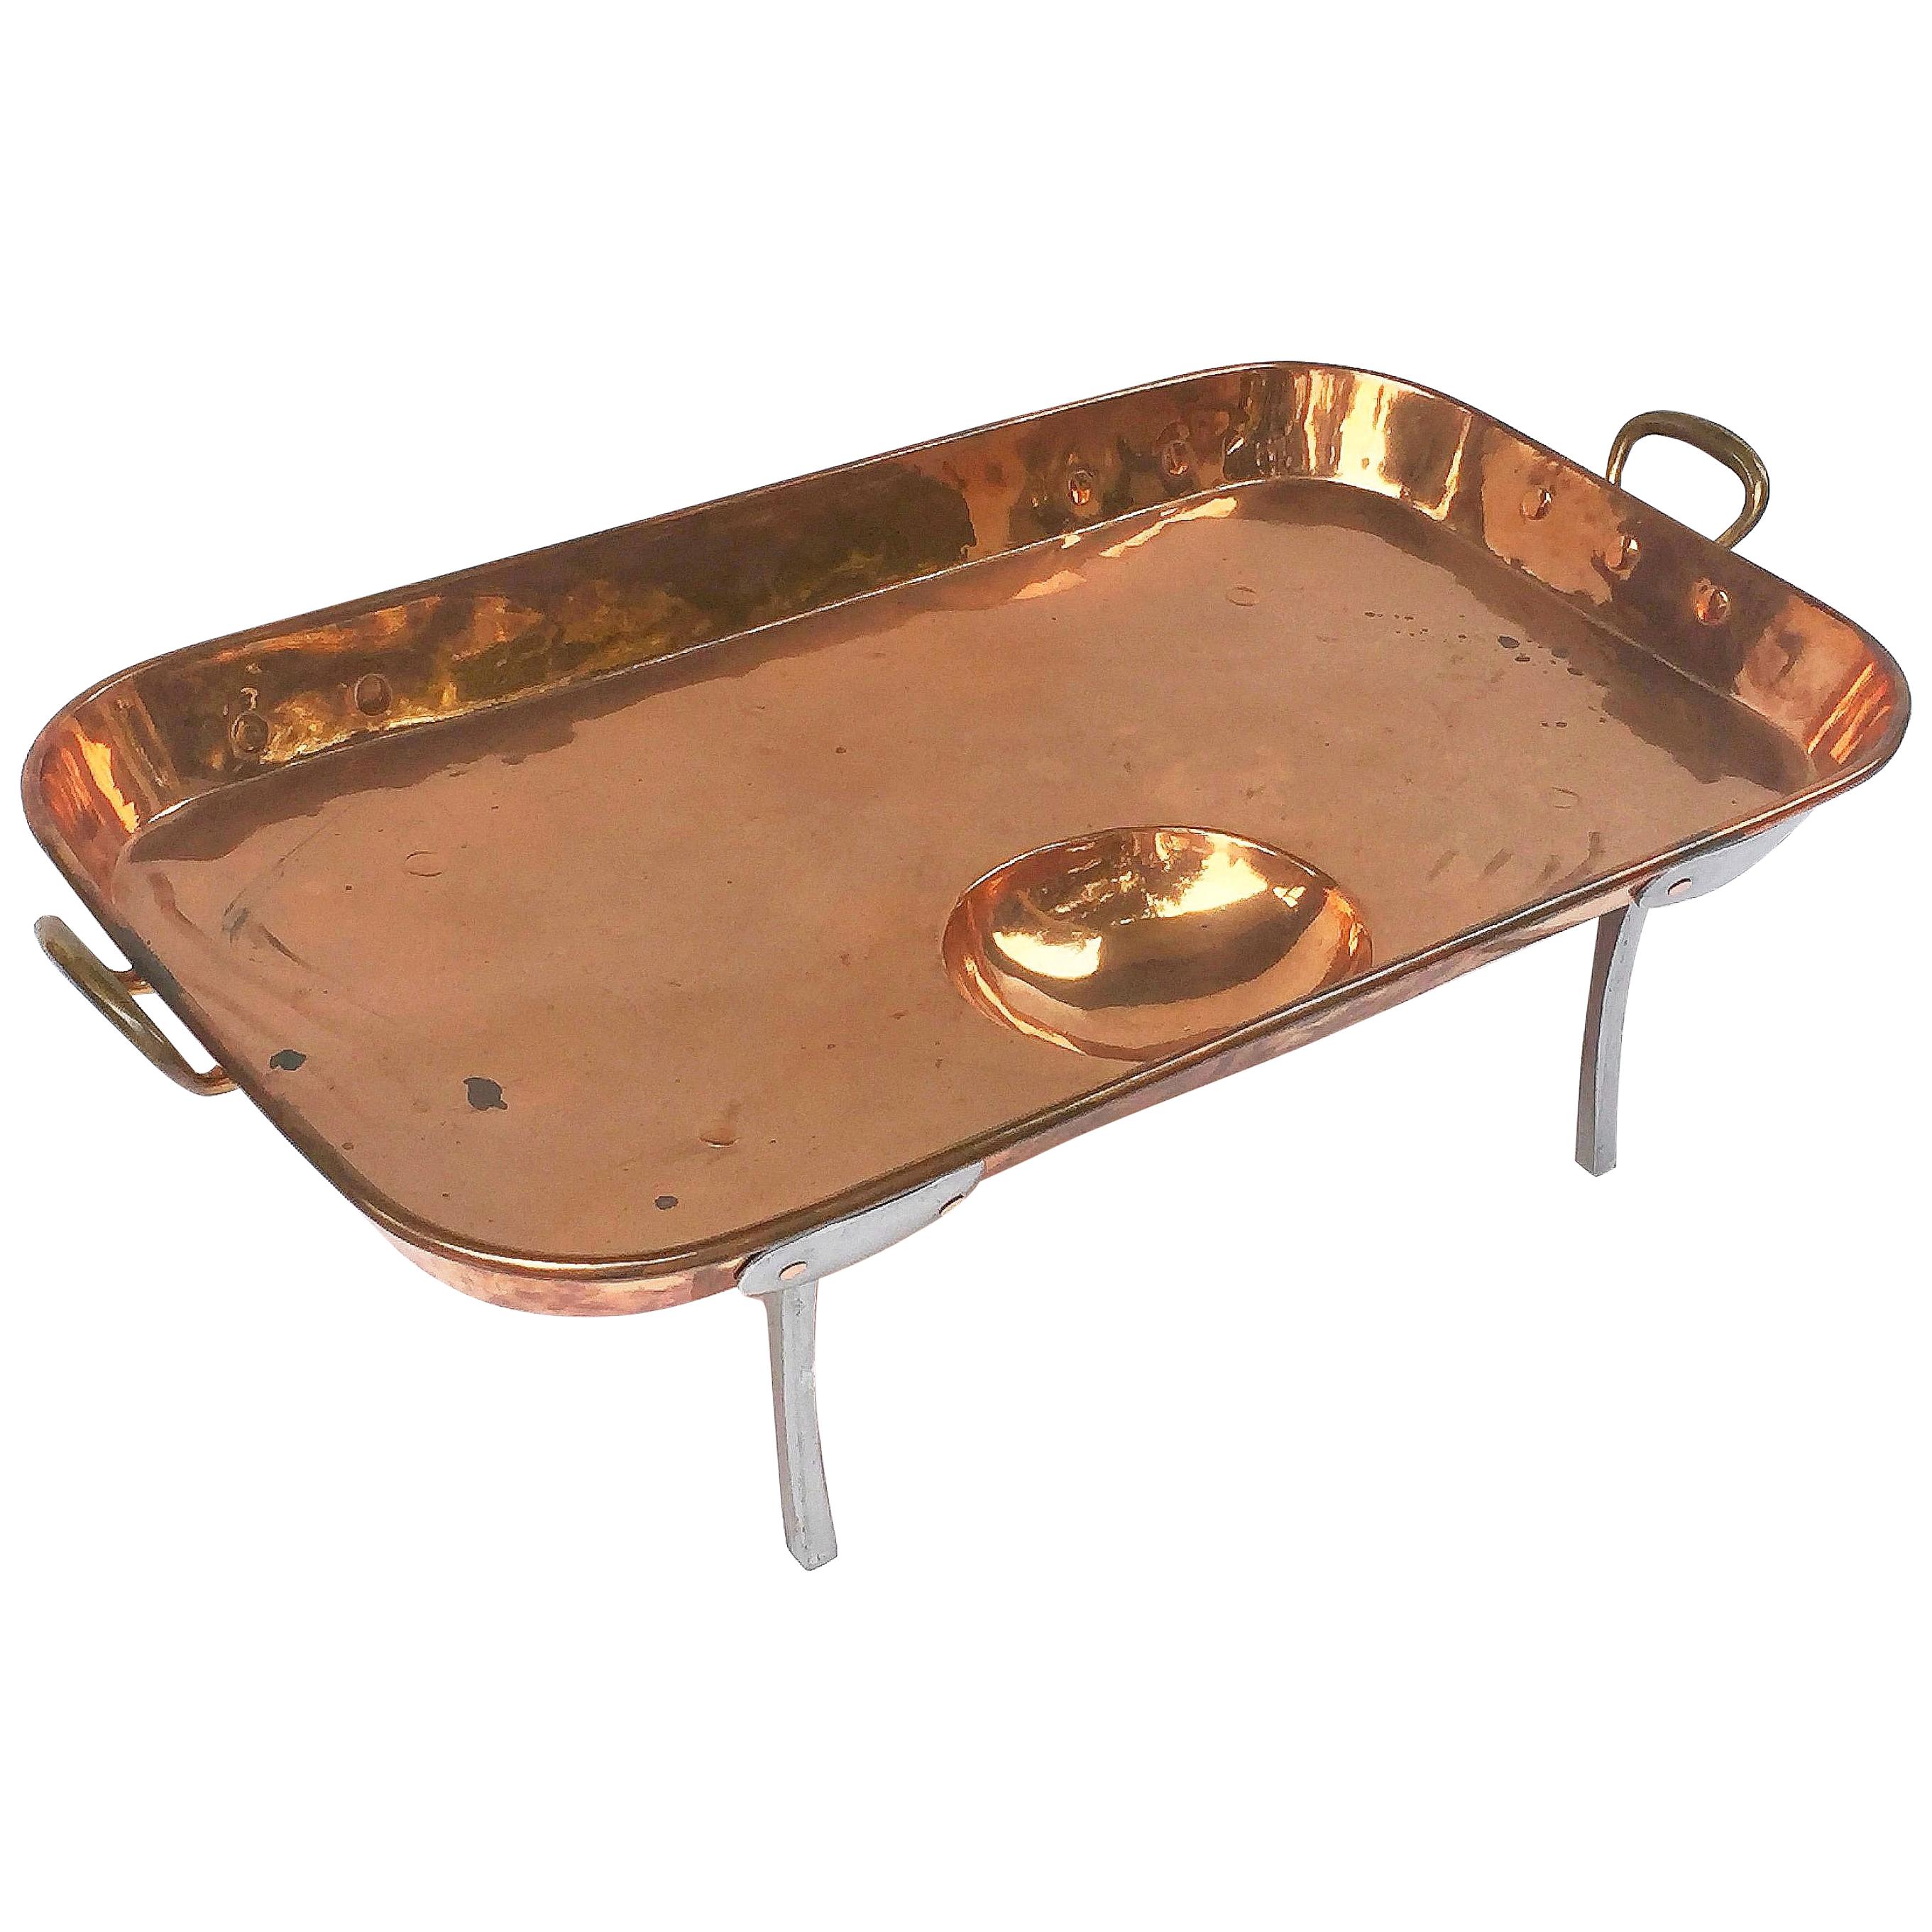 Large English Rectangular Copper Serving Tray or Platter on Steel Feet